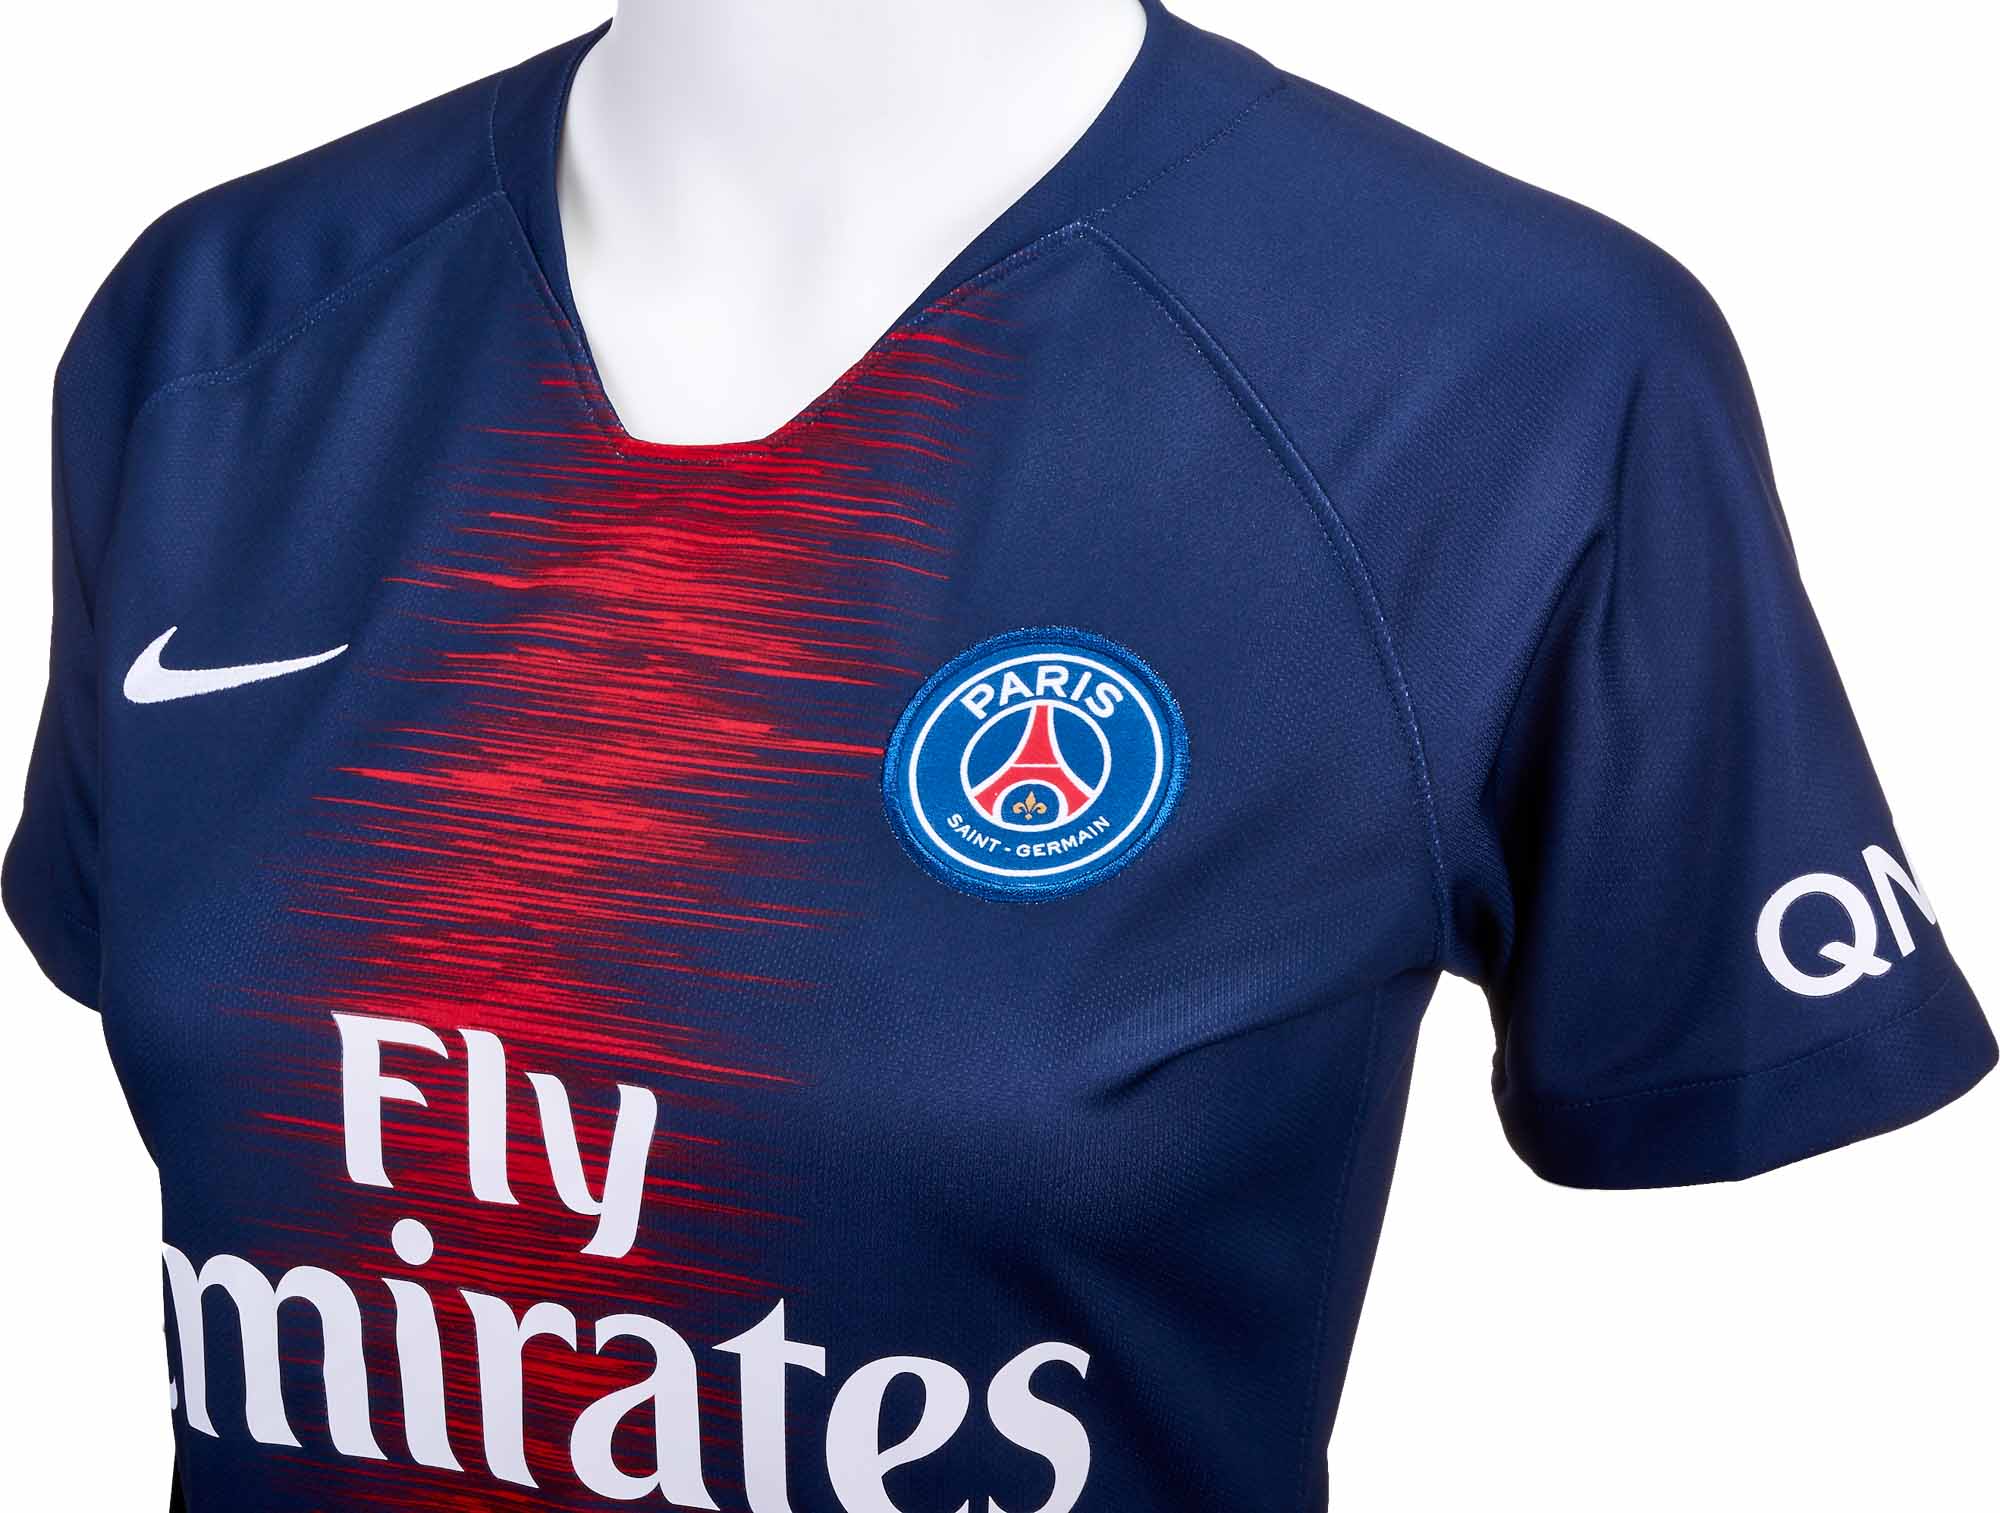 psg jersey with shorts